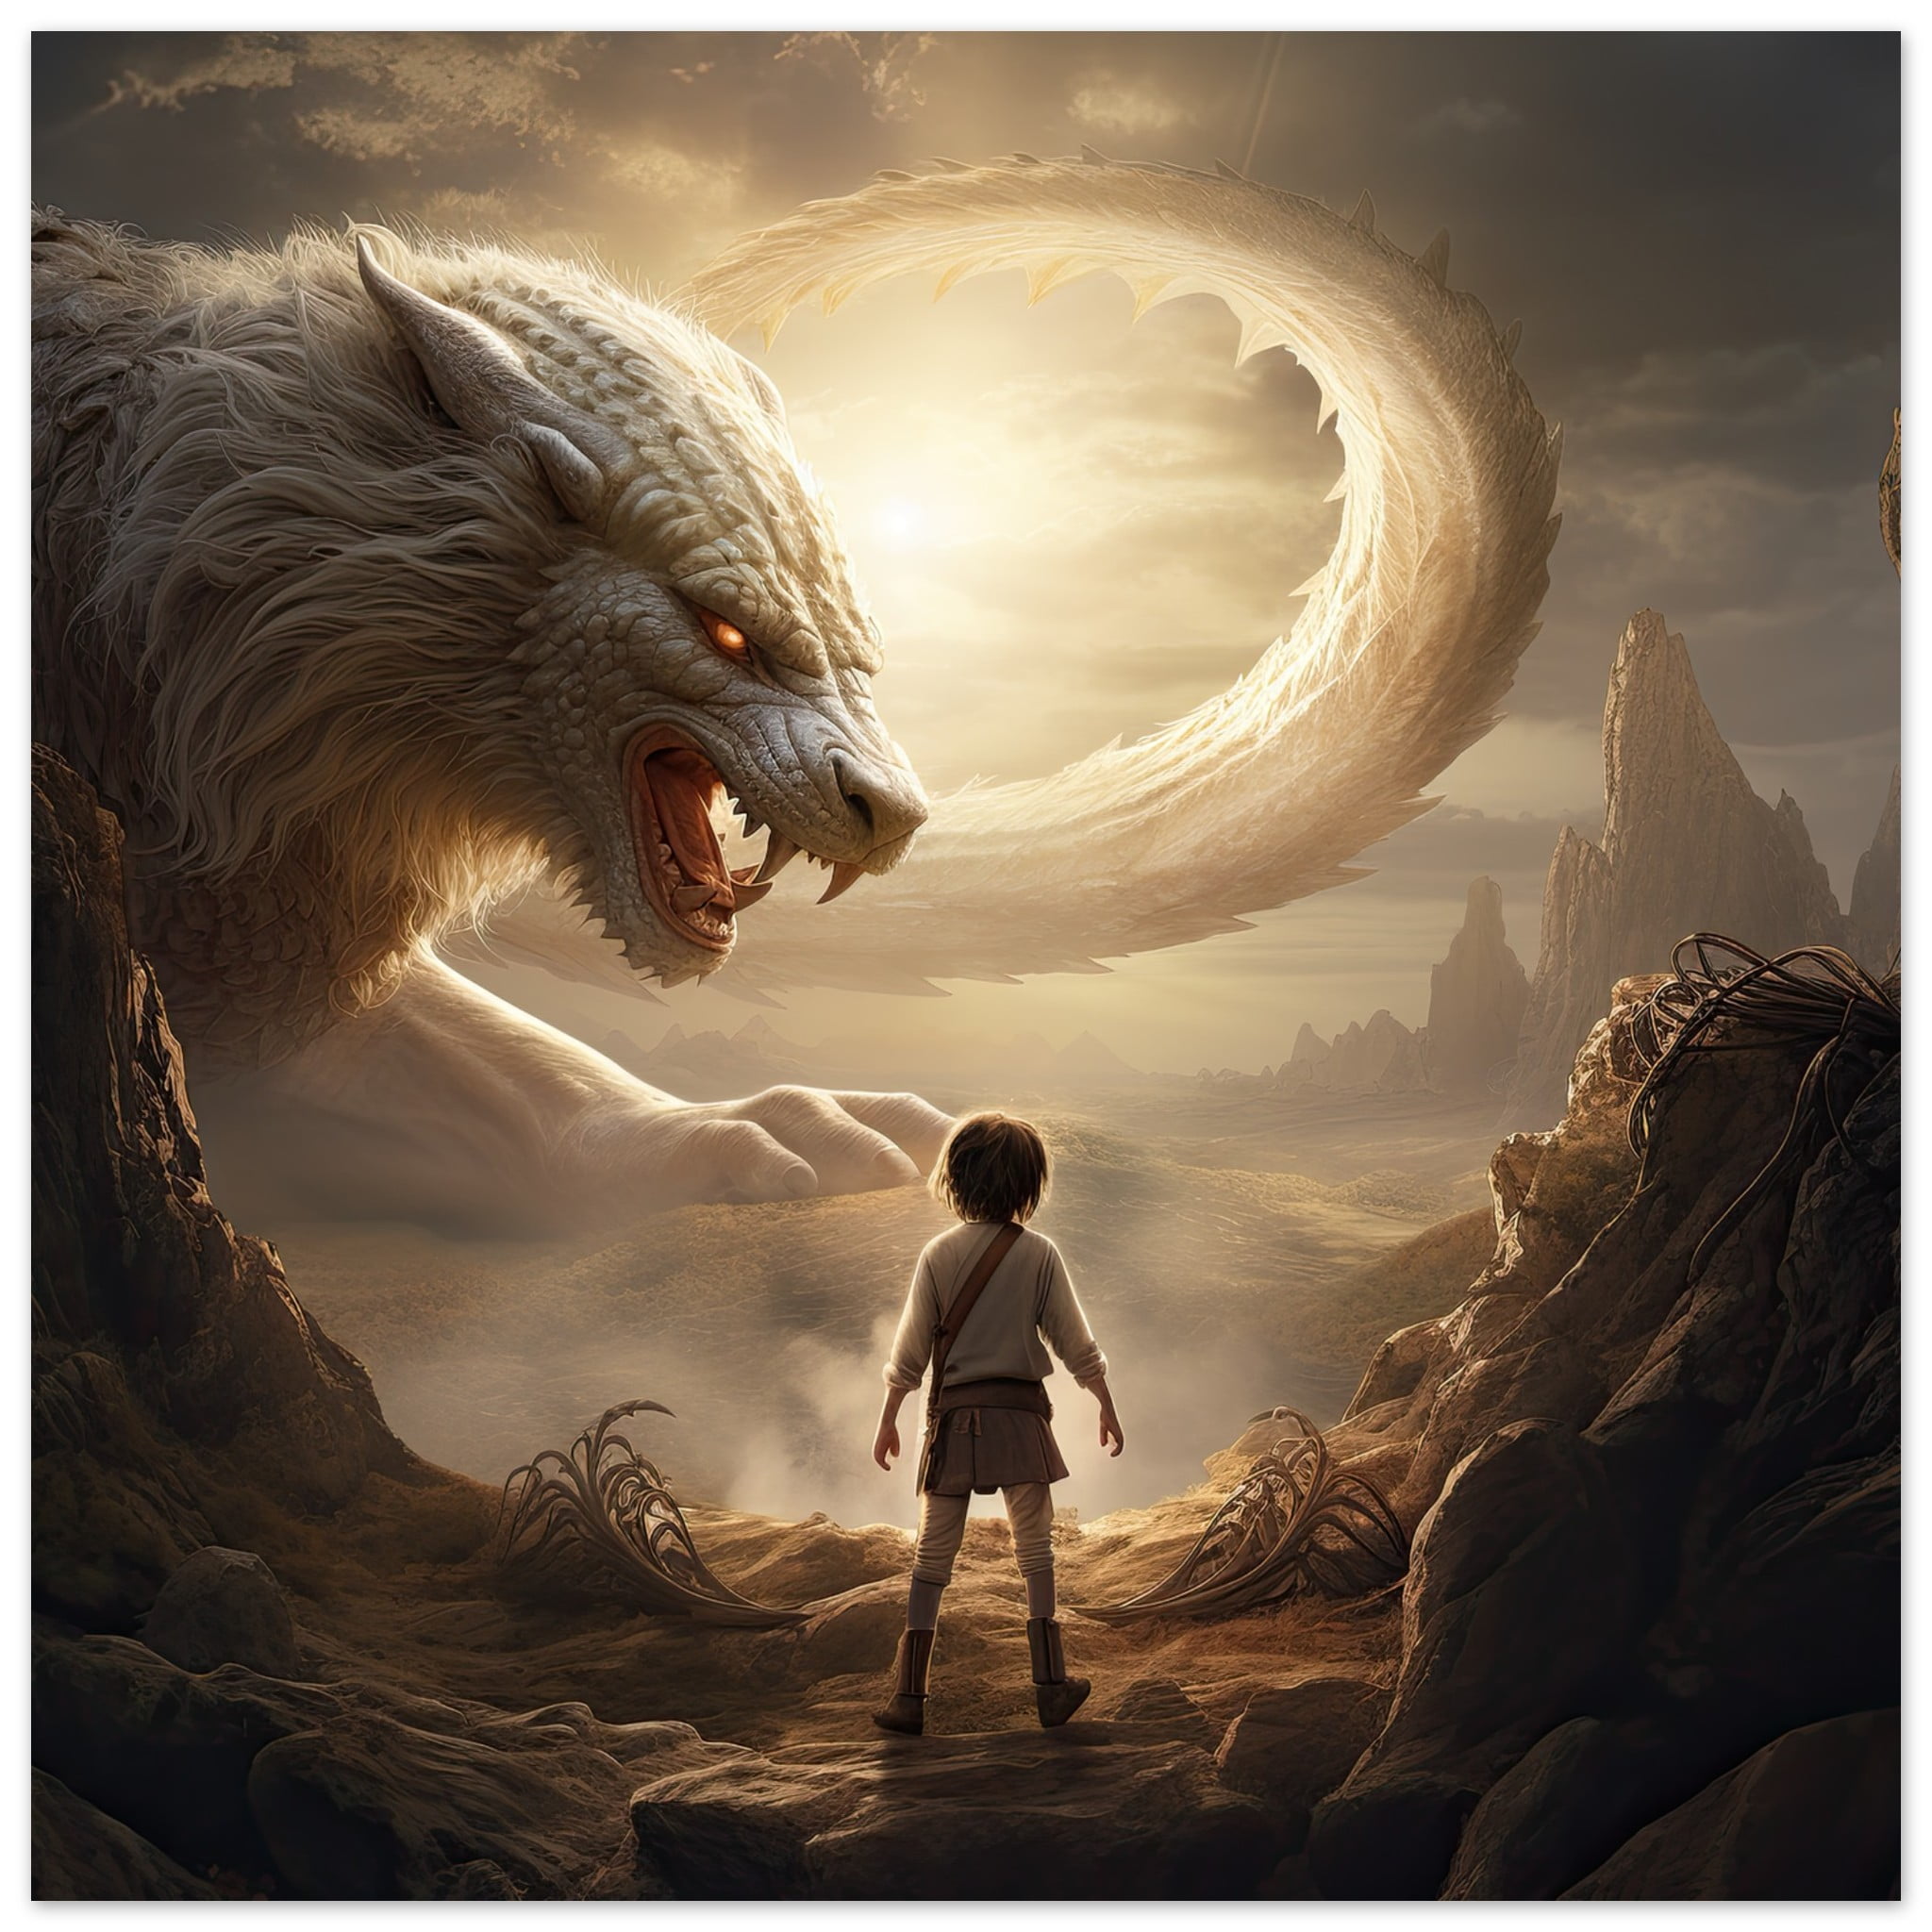 The Boy and the Chimera Metal Print